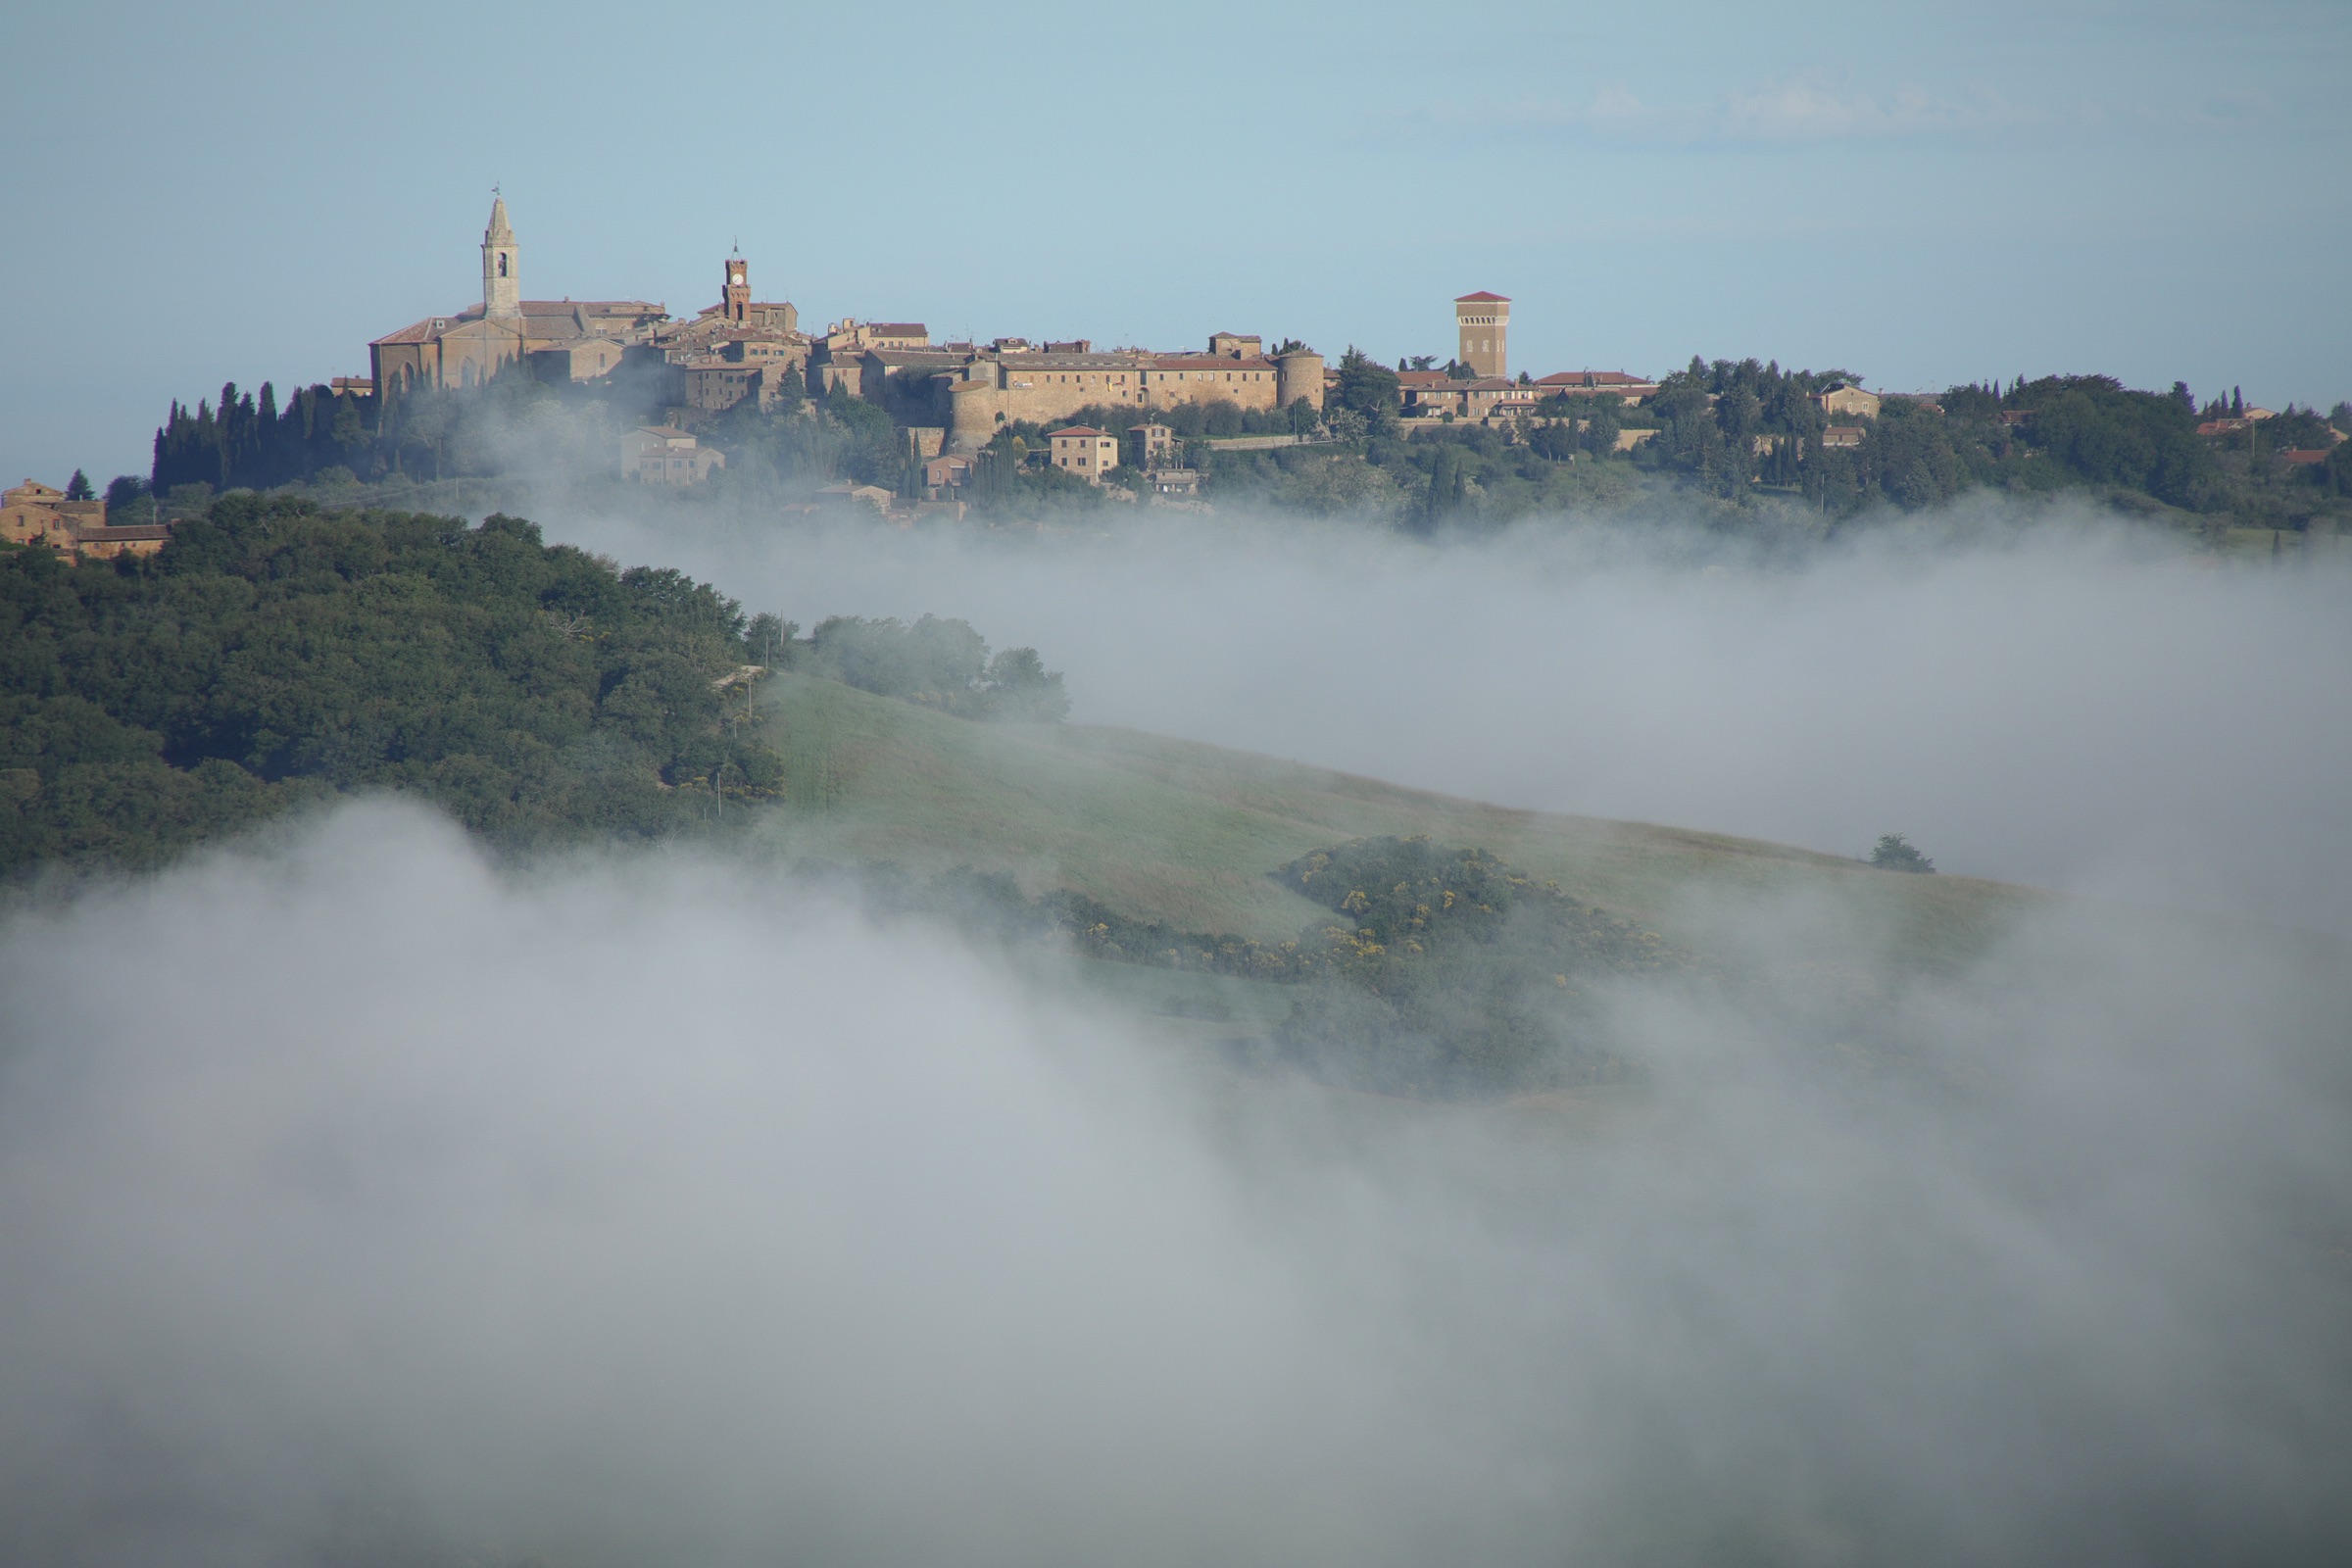 Tuscany Italy photo tour with Don Mammoser - scenery